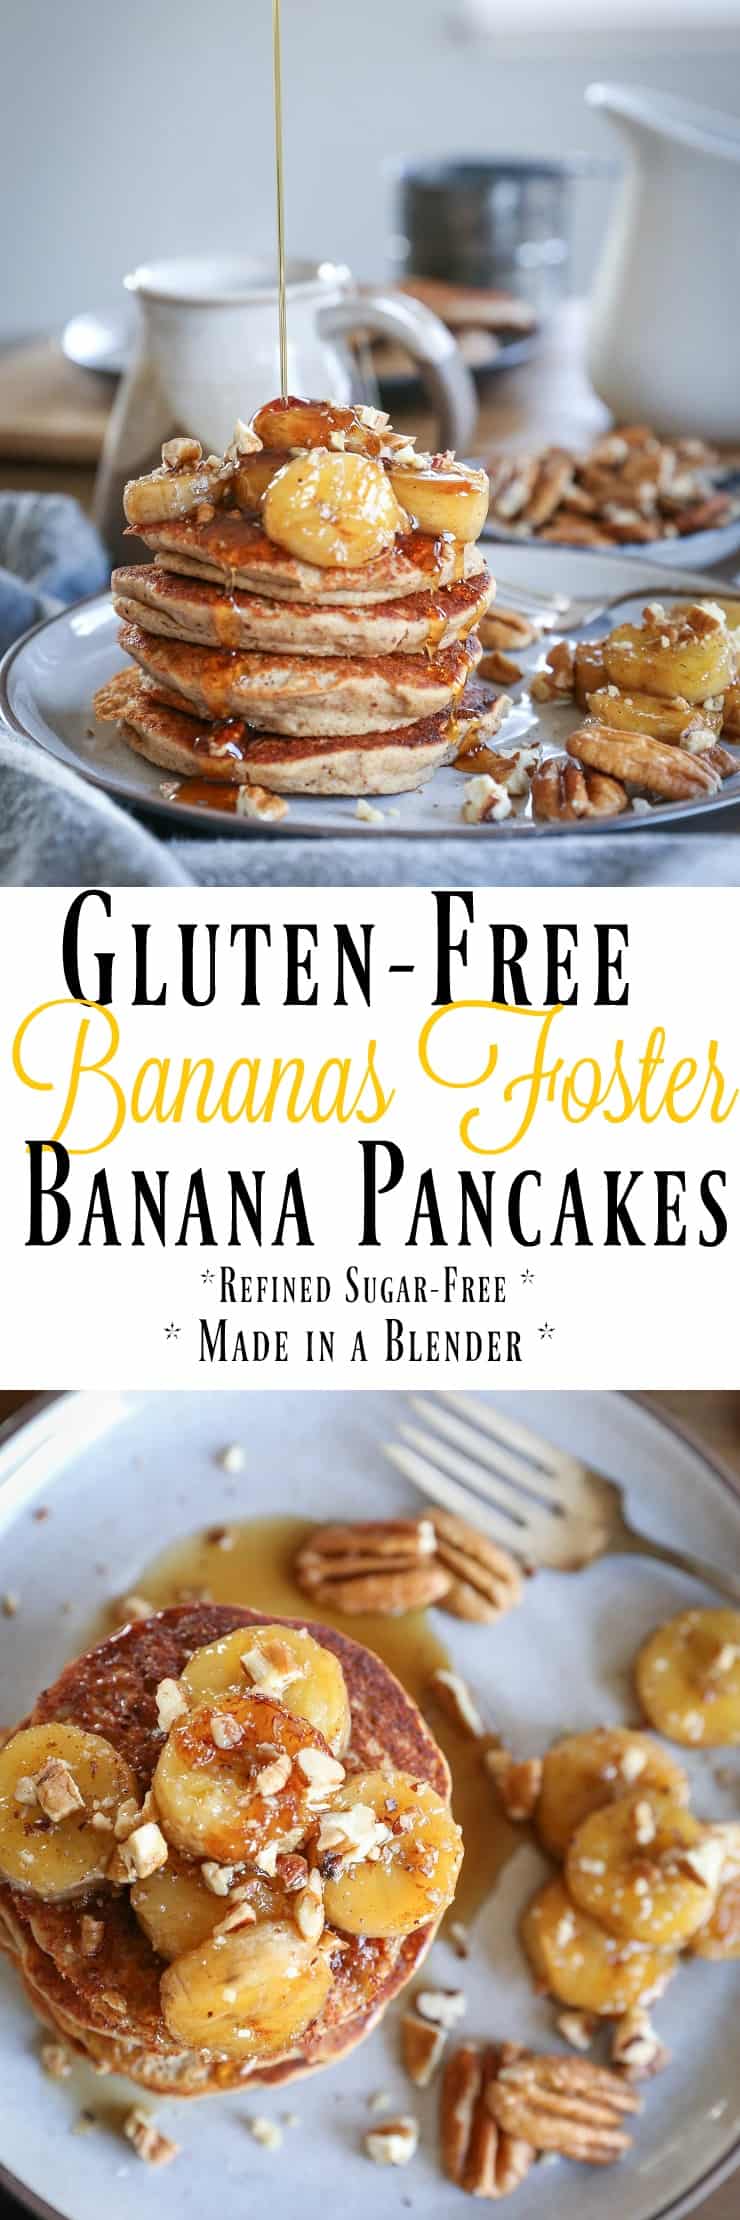 Gluten-Free Bananas Foster Banana Pancakes made with rice flour and almond flour in a blender.